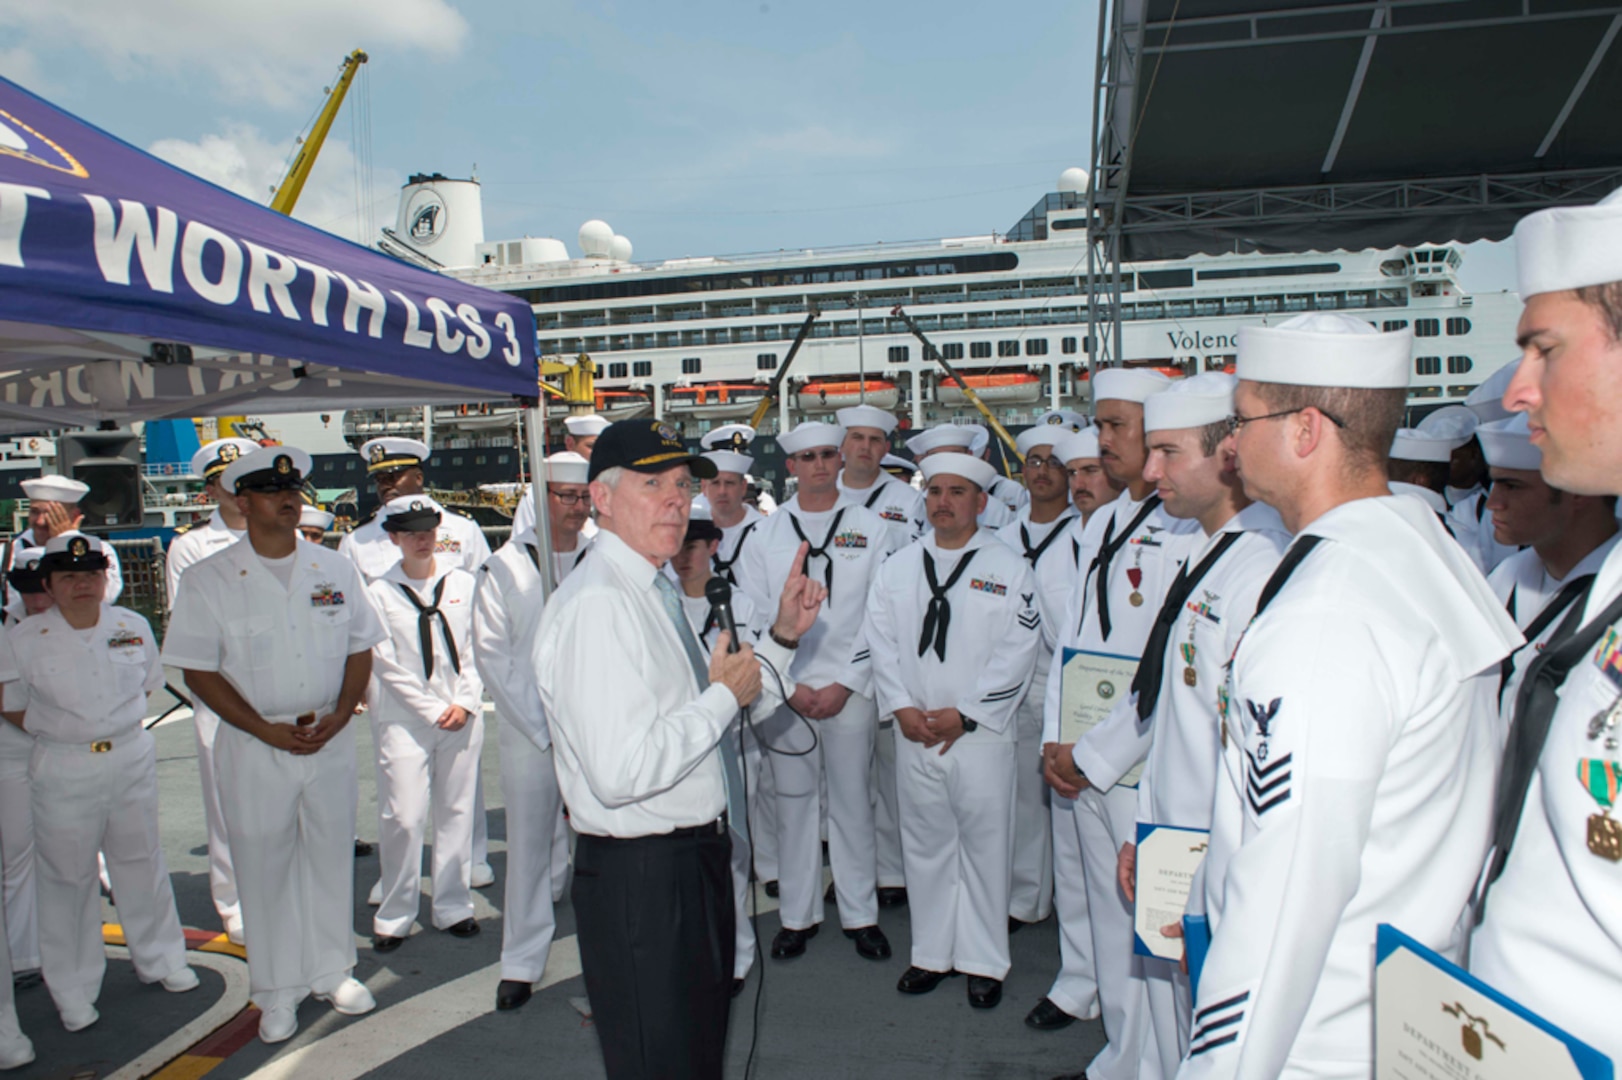 DA NANG Vietnam (Apr. 9, 2015) - Secretary of the Navy Ray Mabus speaks with Sailors aboard the littoral combat ship USS Fort Worth (LCS 3) during Naval Engagement Activity (NEA) Vietnam 2015. Mabus highlighted the importance of exchanges like NEA in fostering relationships and strengthening maritime partnerships. In its sixth year, NEA Vietnam is designed to foster mutual understanding, build confidence in the maritime domain and strengthen relationships between the U.S. Navy, Vietnam People's Navy and the local community. (U.S. Navy photo by MC2 Conor Minto/Released)